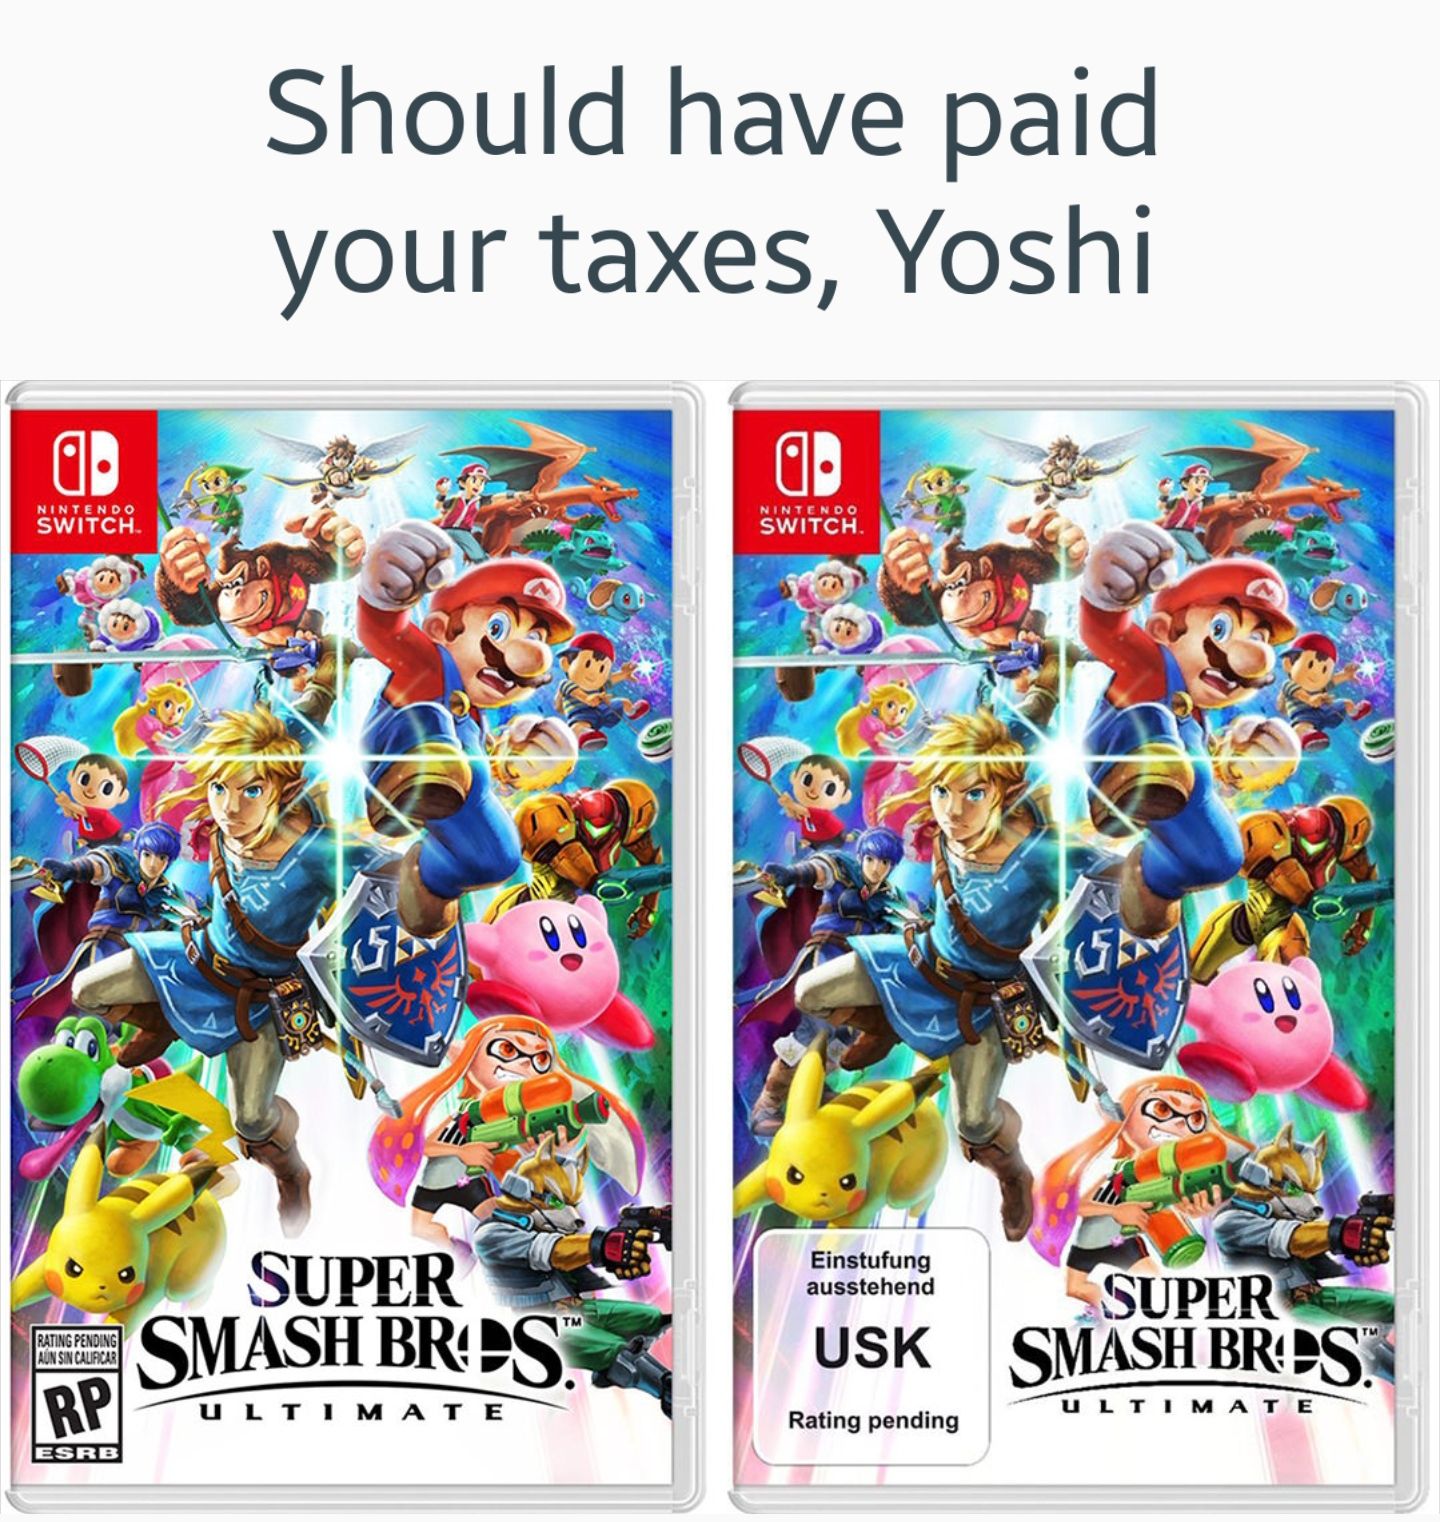 Yoshi is missing from the German cover